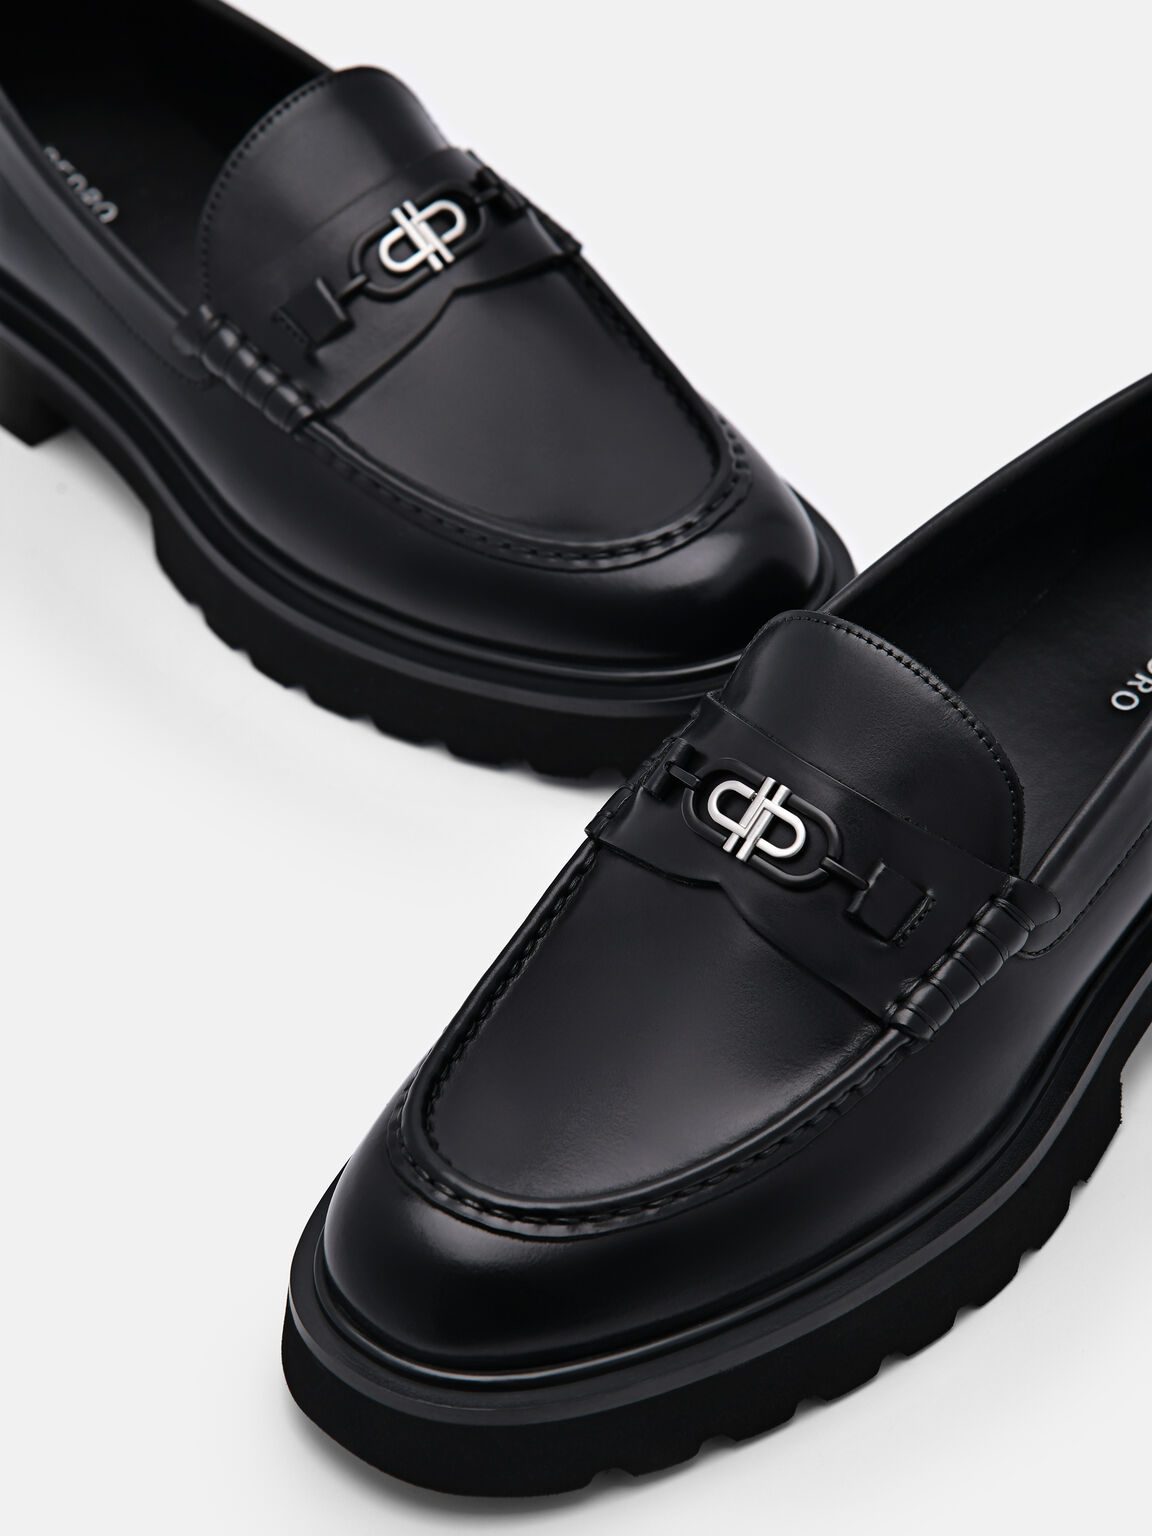 PEDRO Icon Leather Loafers, Black, hi-res